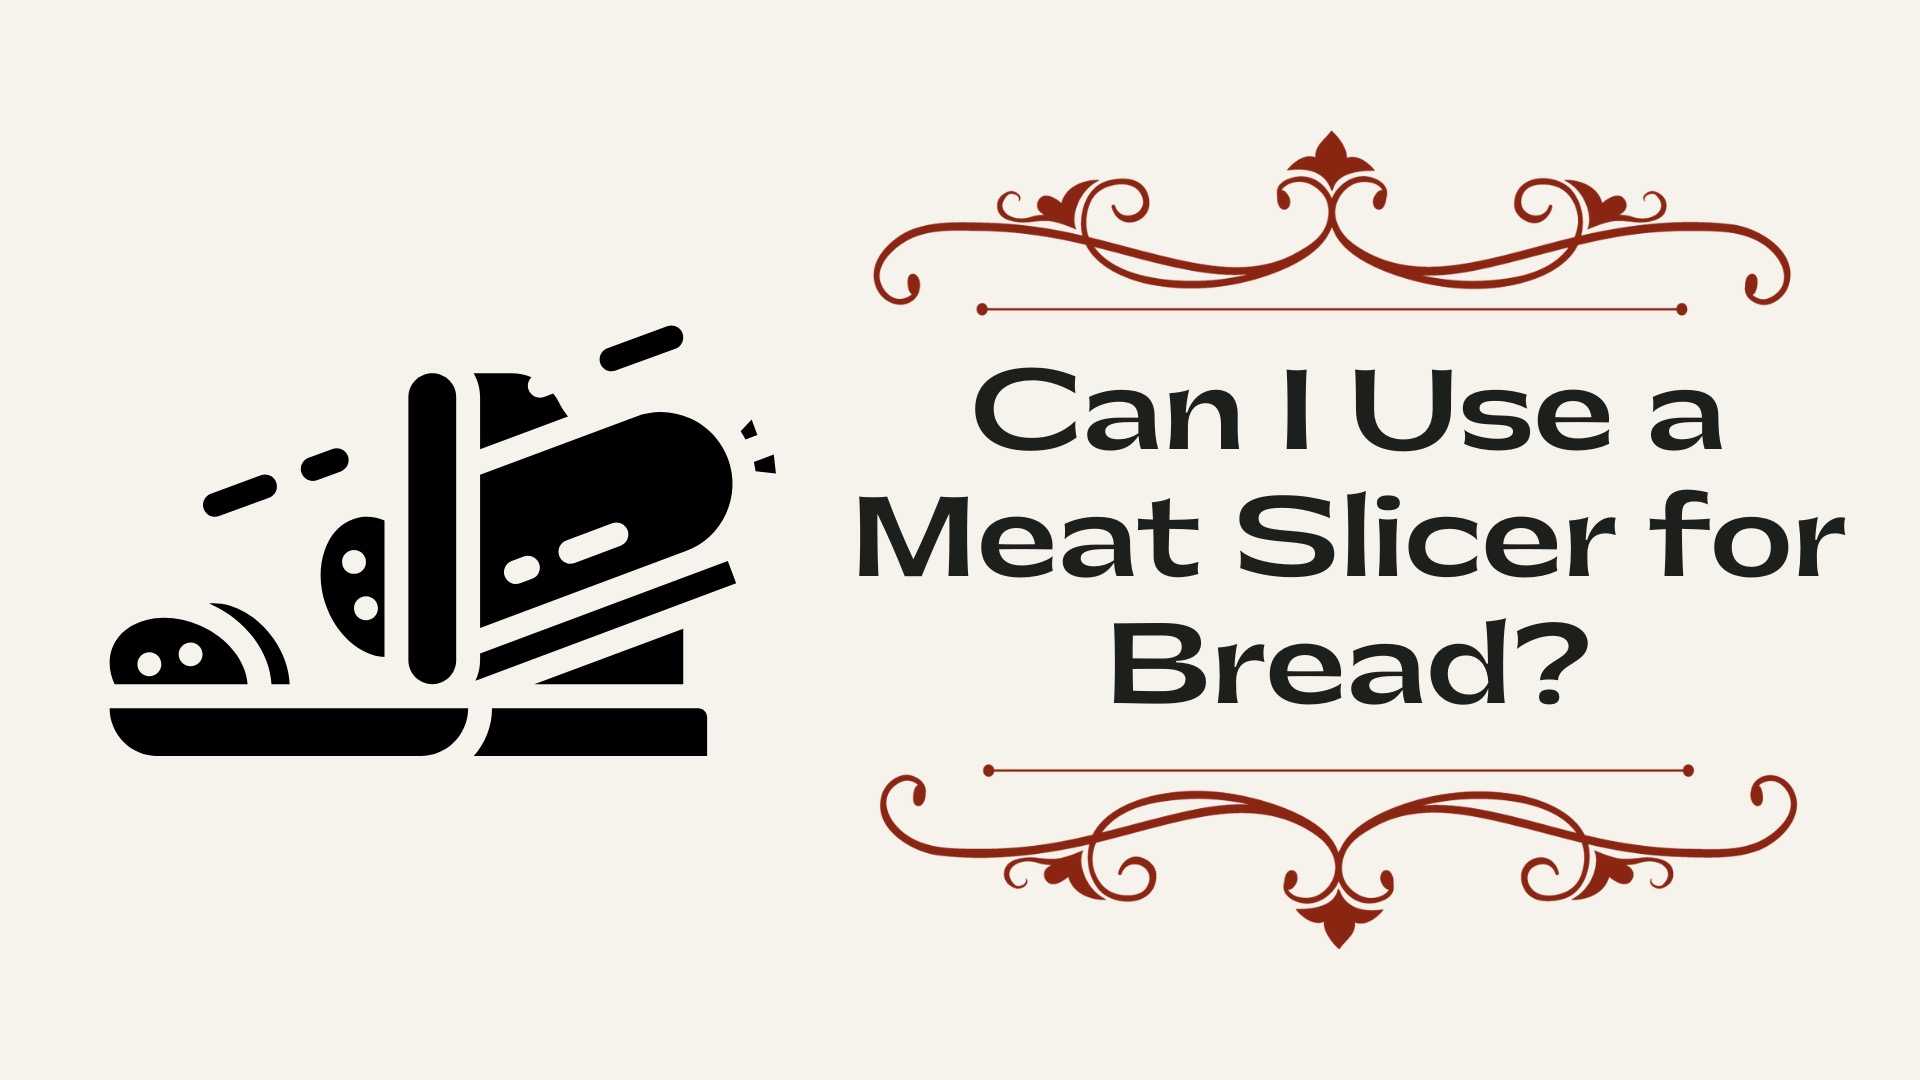 Can I Use a Meat Slicer for Bread